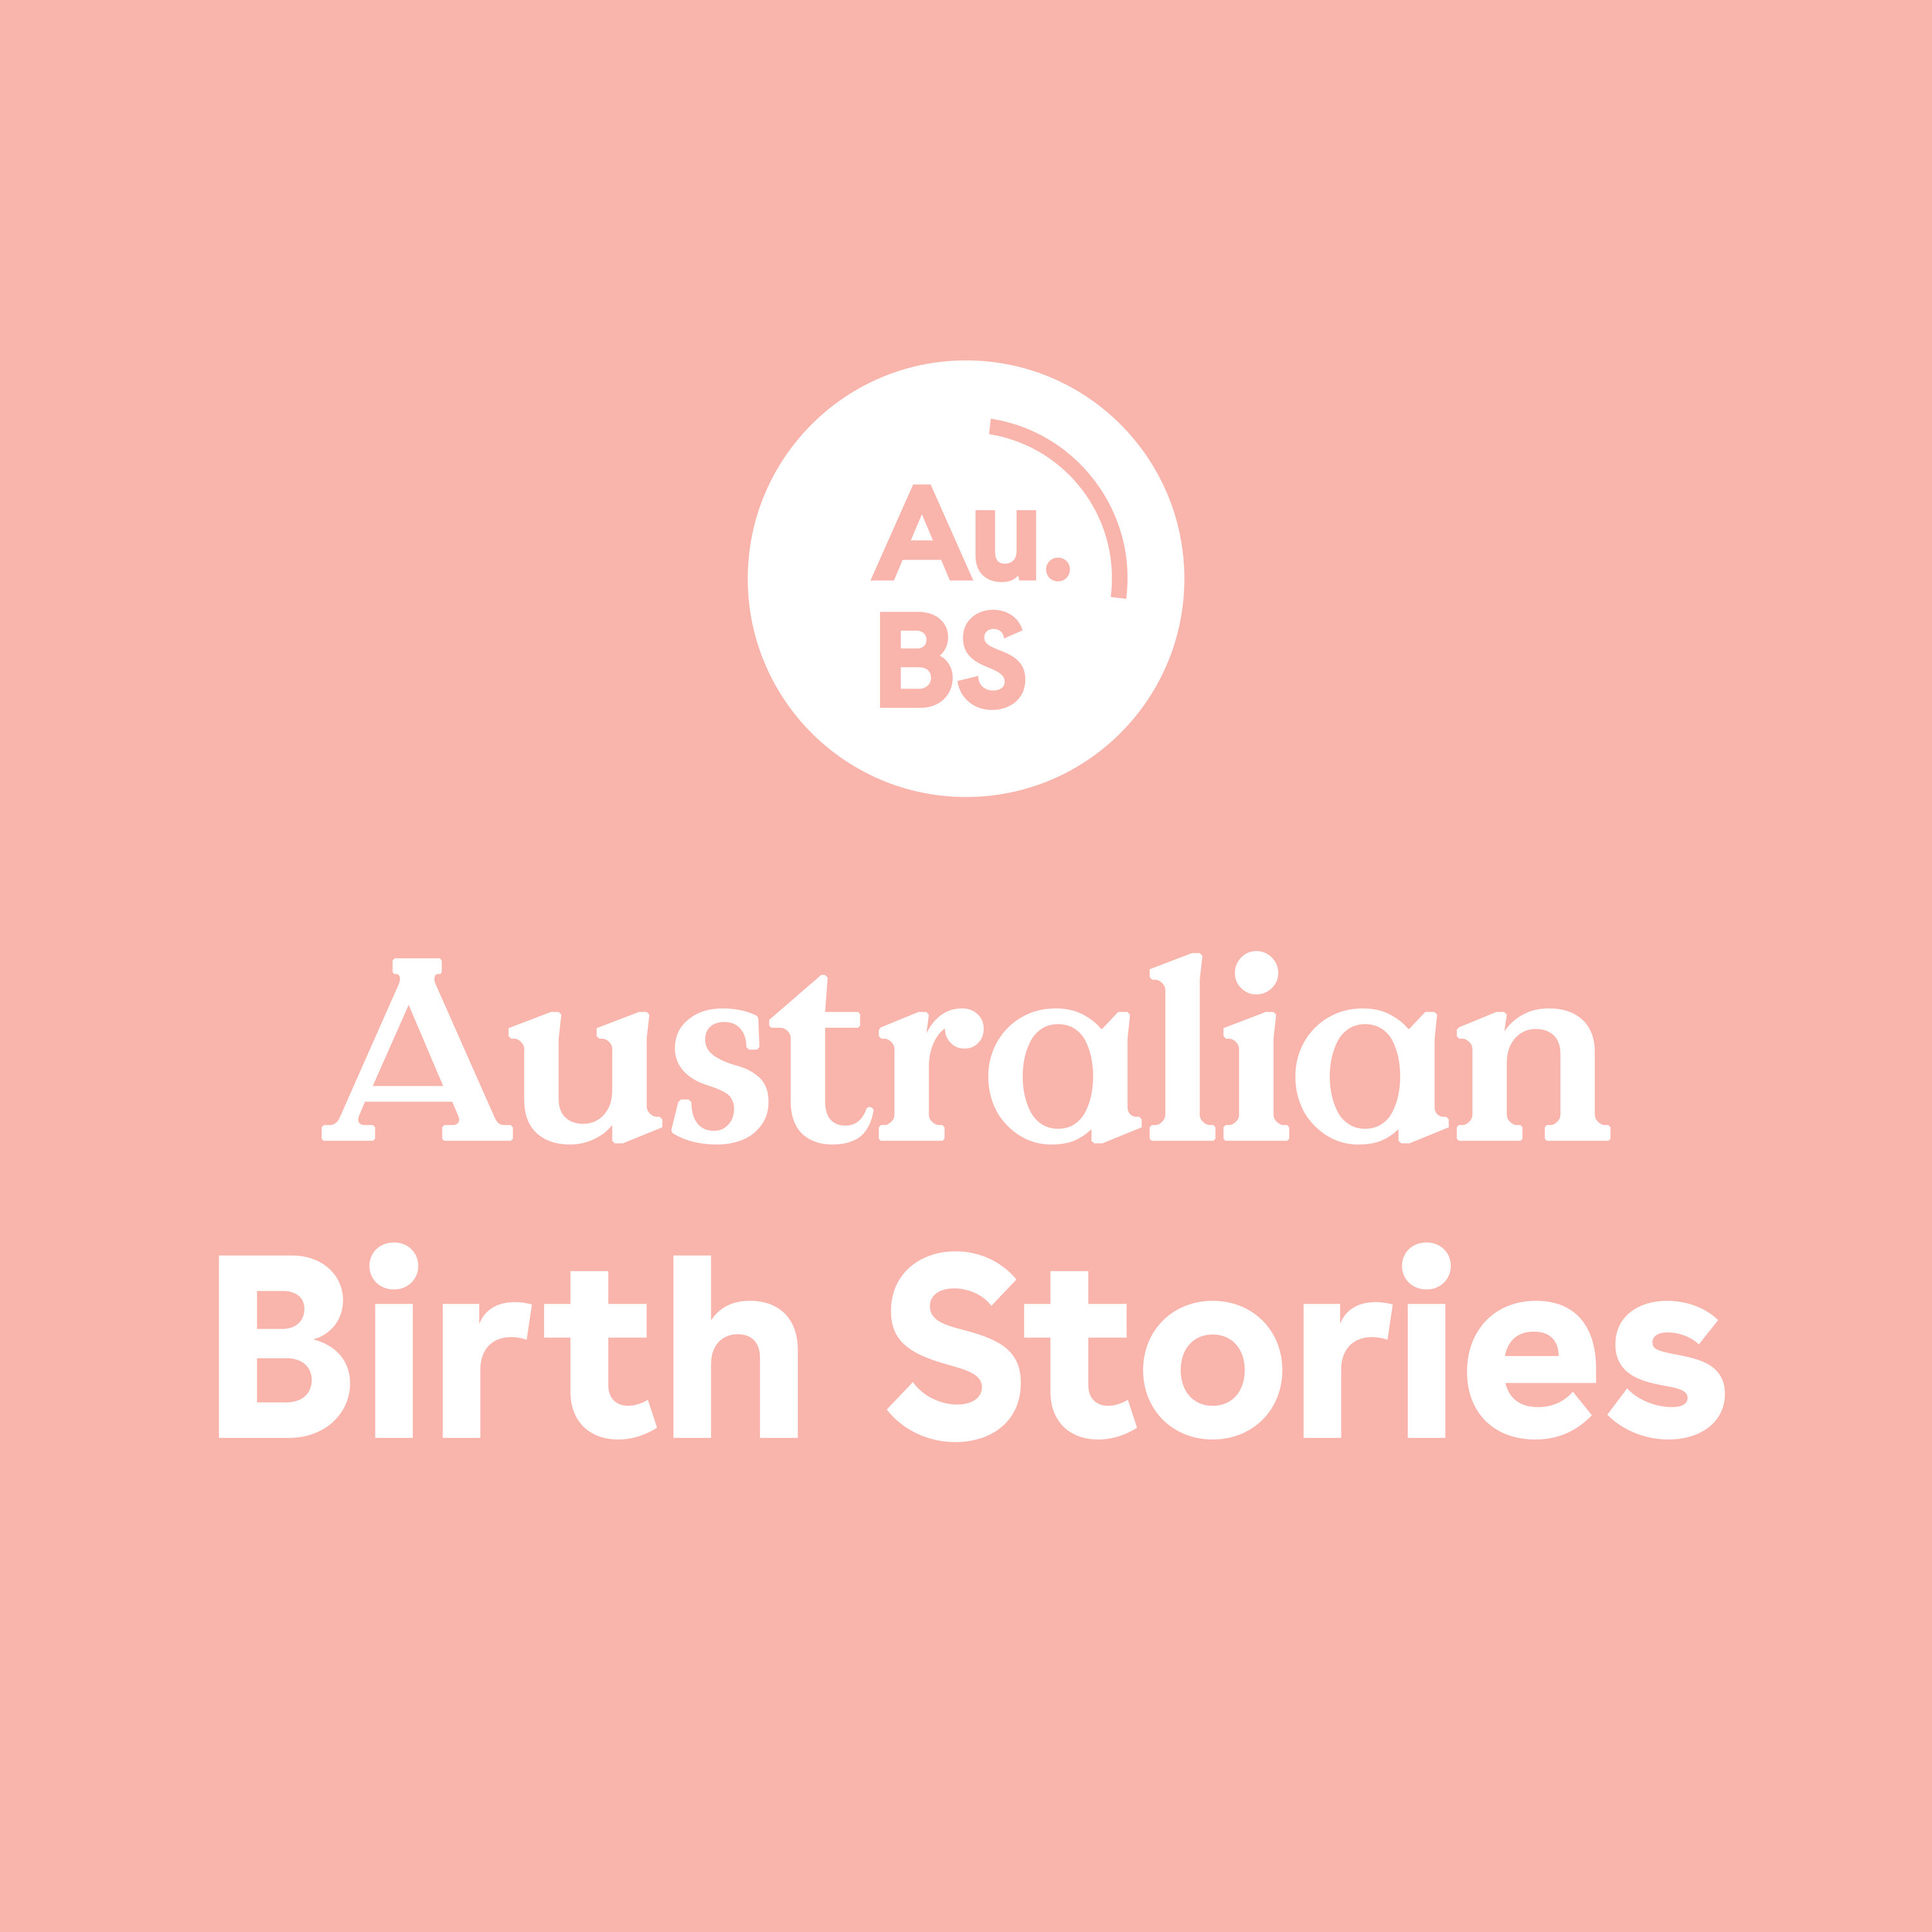 472 | Sarah Davidson, one baby, private obstetrician, miscarriage, ovulation induction, gestational diabetes, footling breech, planned caesarean